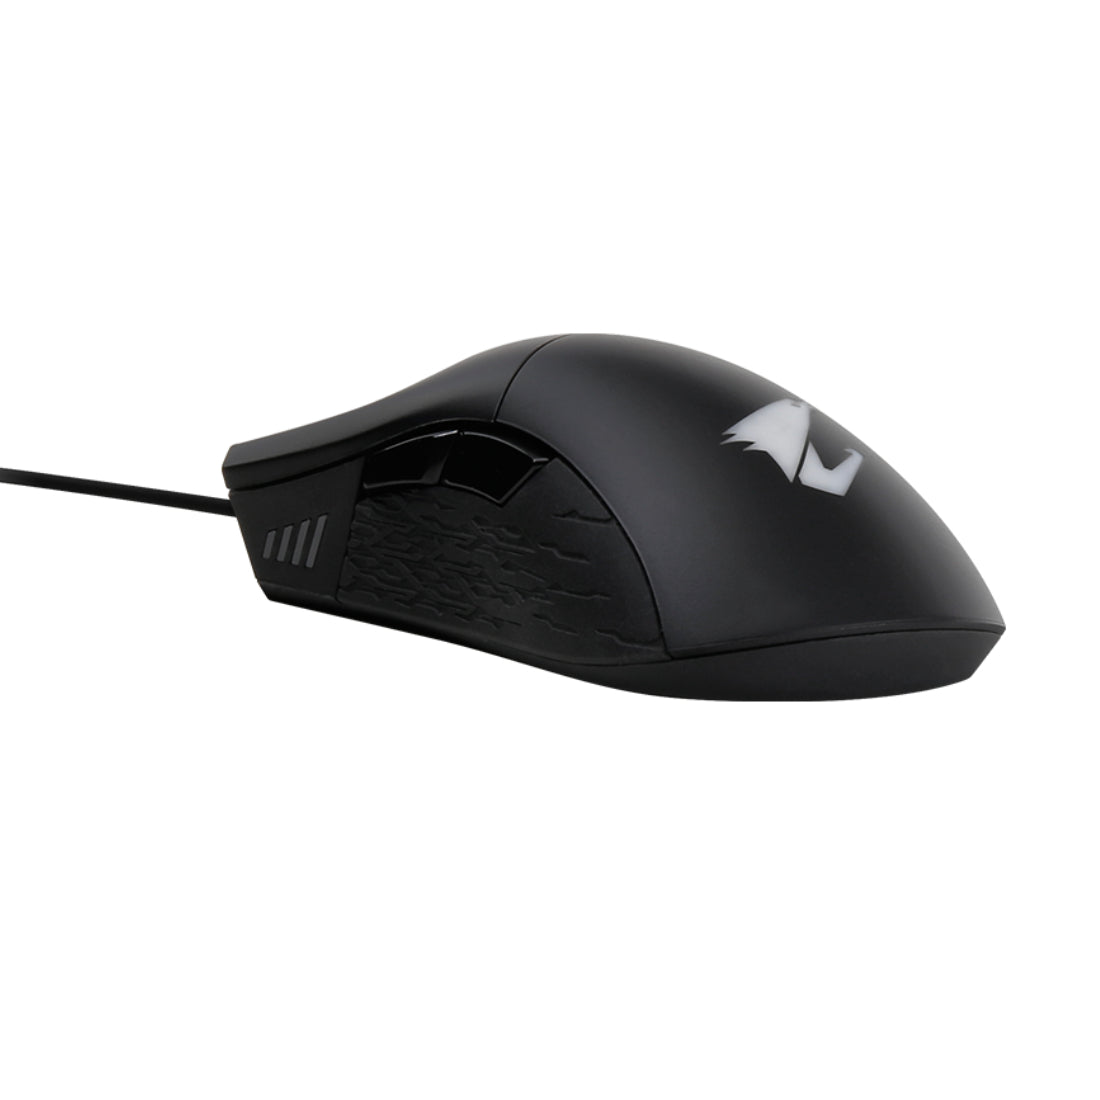 Gigabyte Aorus M3 Wired Gaming Mouse - Matte Black - Store 974 | ستور ٩٧٤